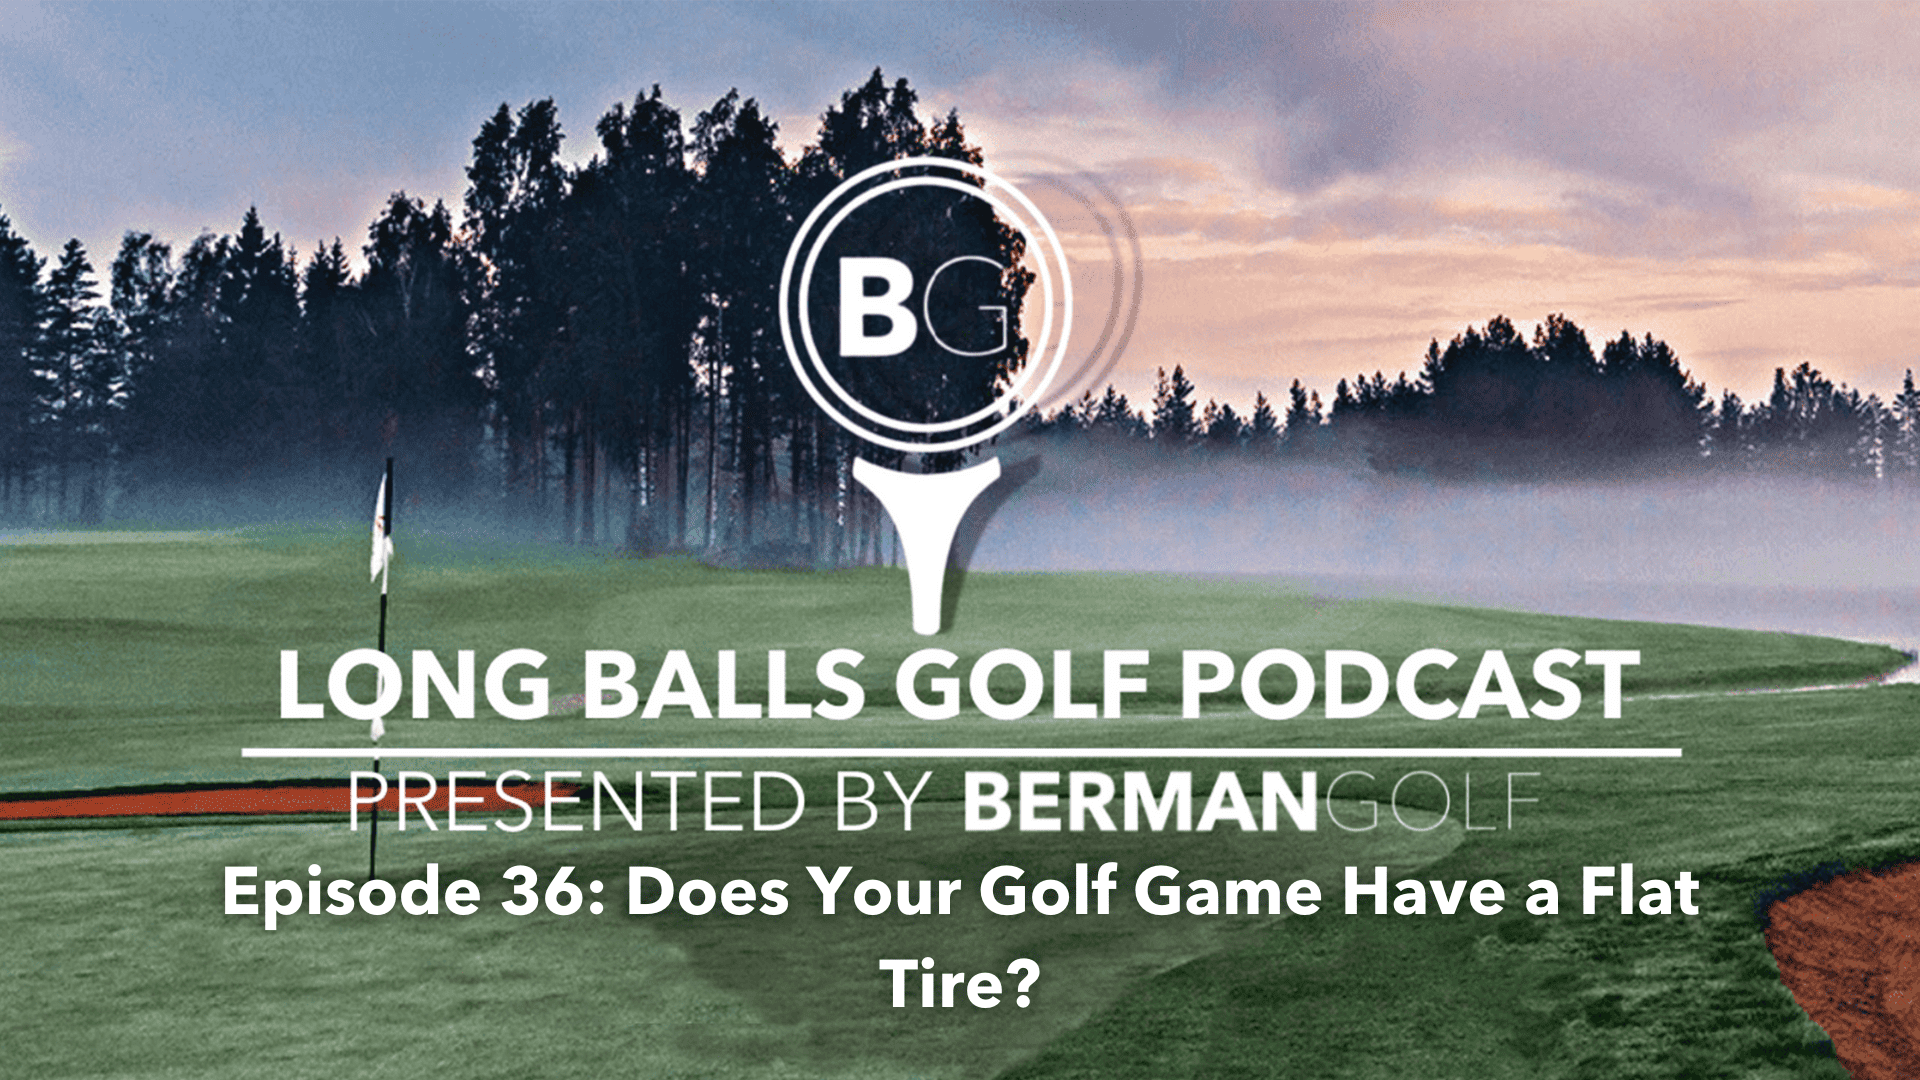 Episode 36: Does Your Golf Game Have a Flat Tire?